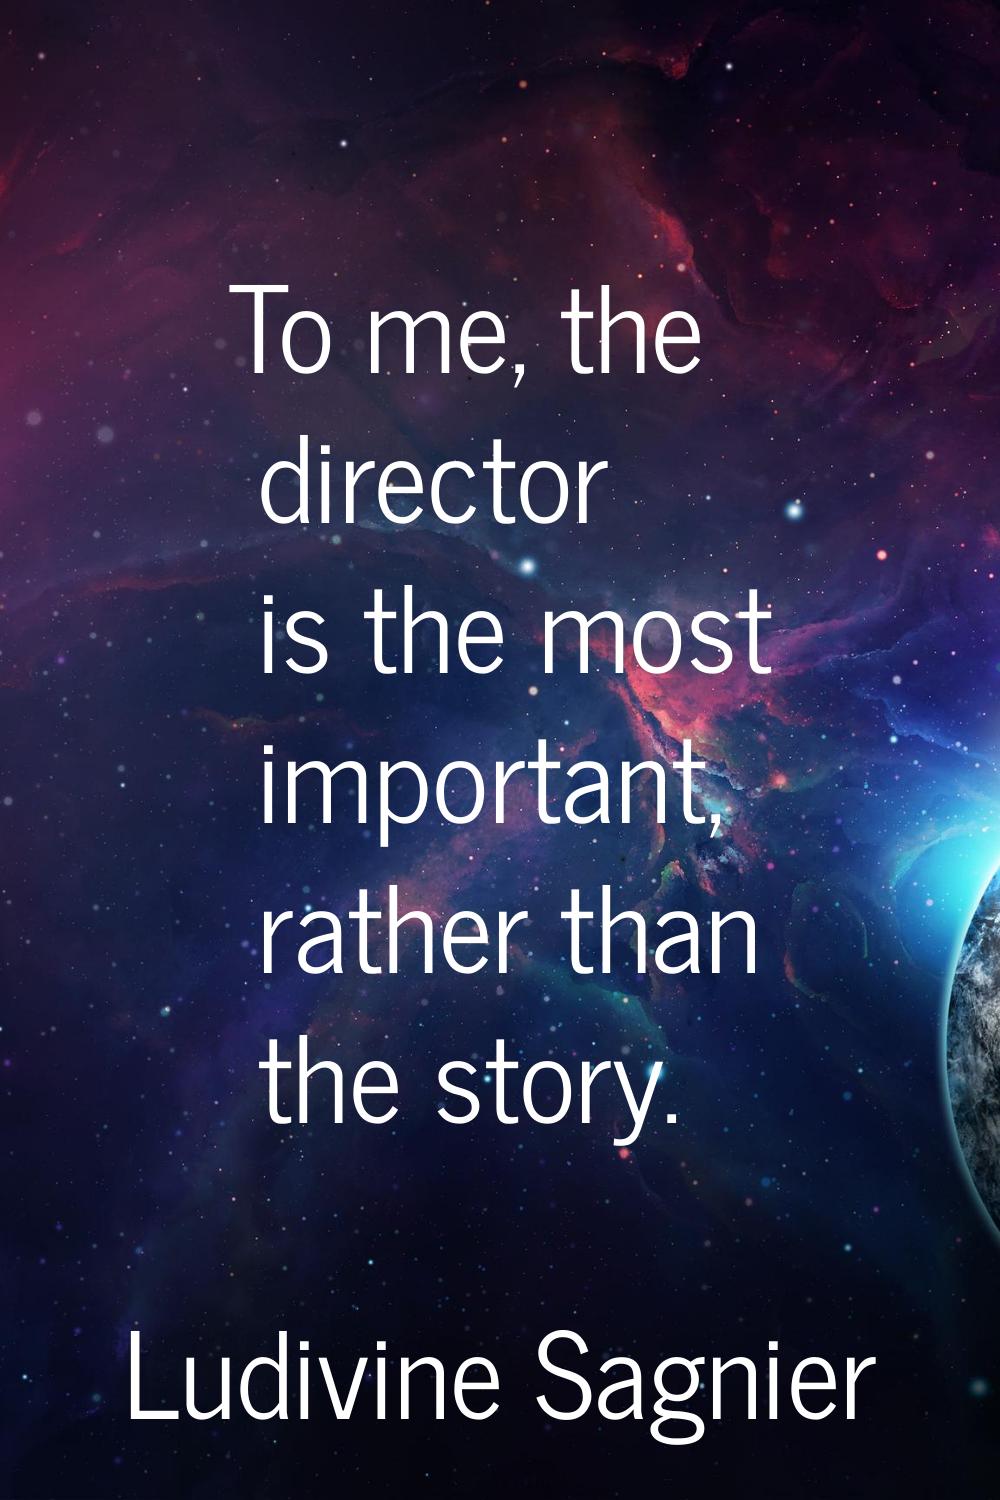 To me, the director is the most important, rather than the story.